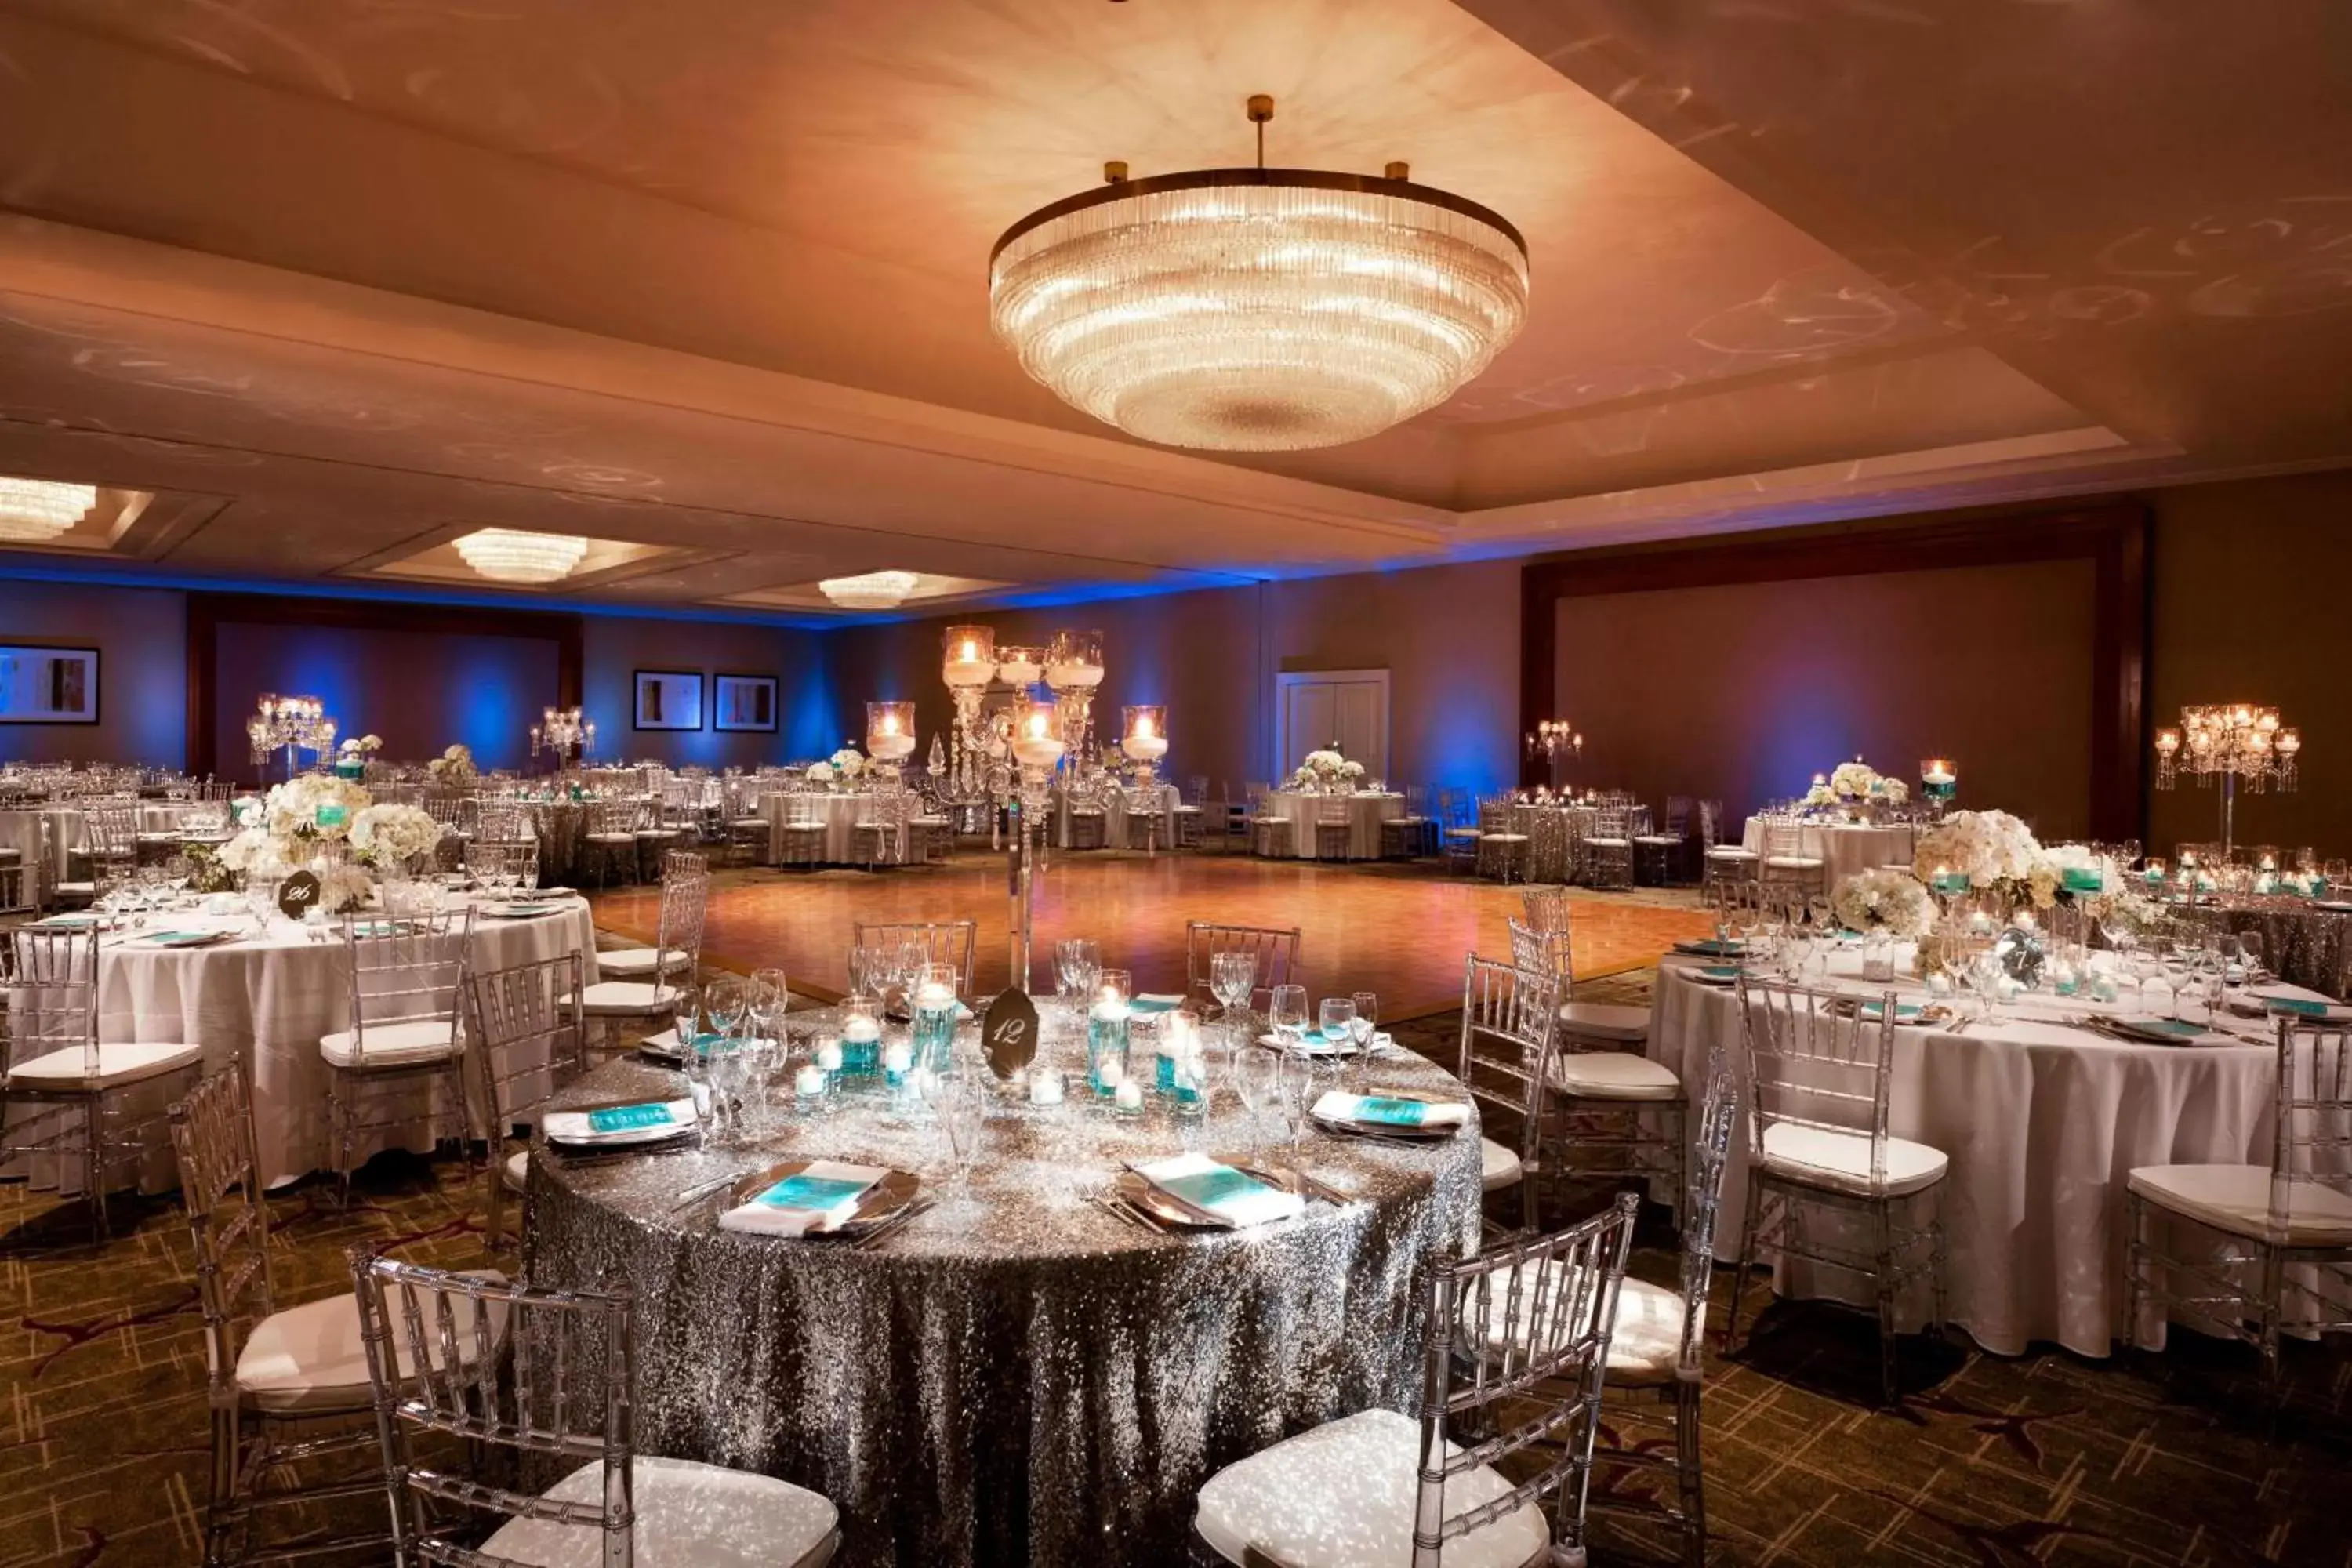 Meeting/conference room, Banquet Facilities in The Westin South Coast Plaza, Costa Mesa